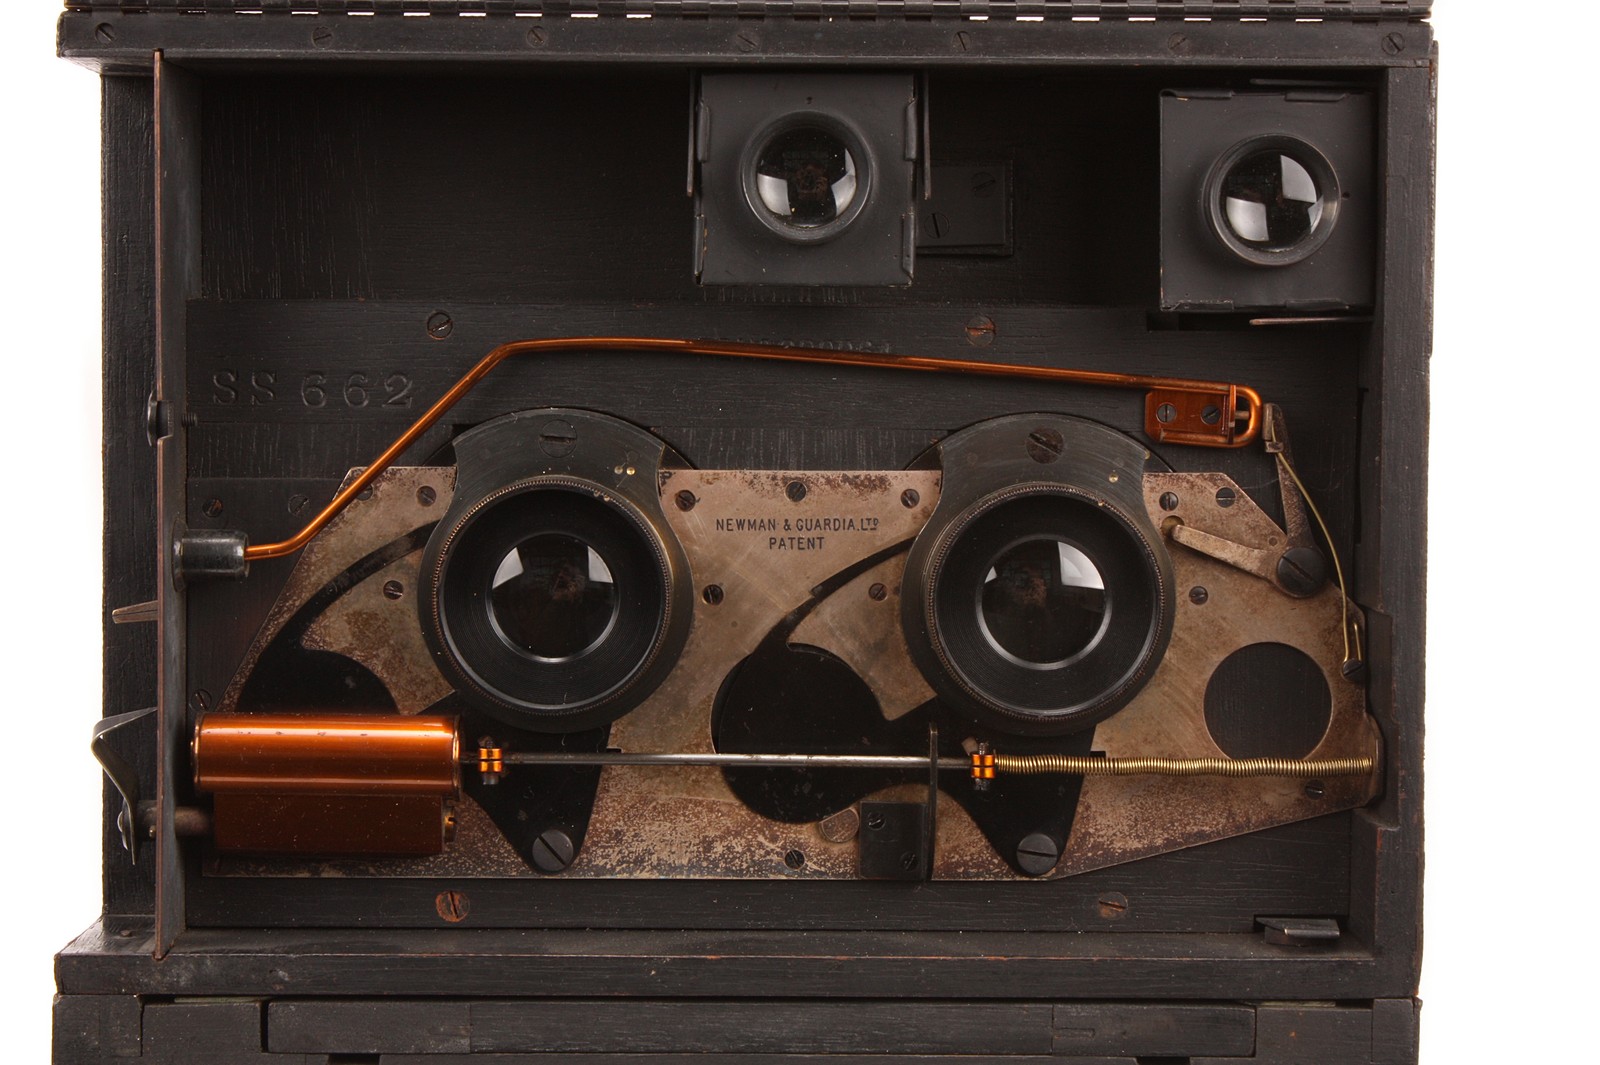 A Newman & Guardia Special Stereoscopic Stereo Detective Camera, 10x15cm, serial no. SS662, with - Image 4 of 5